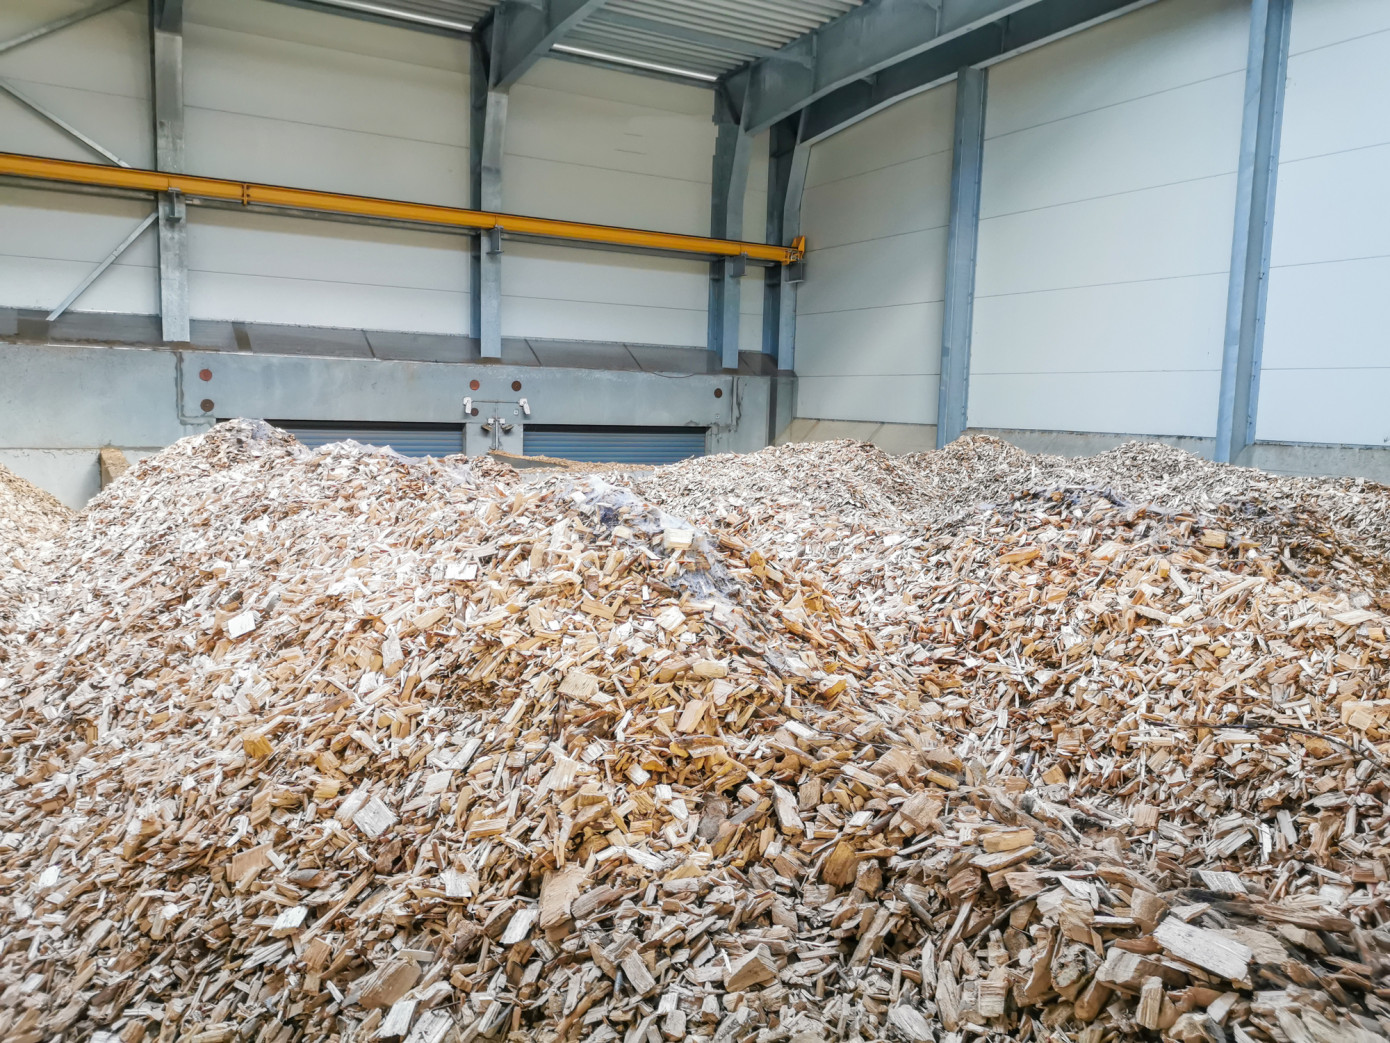 In February, price for wood chips exported from Vietnam to China slips 3%